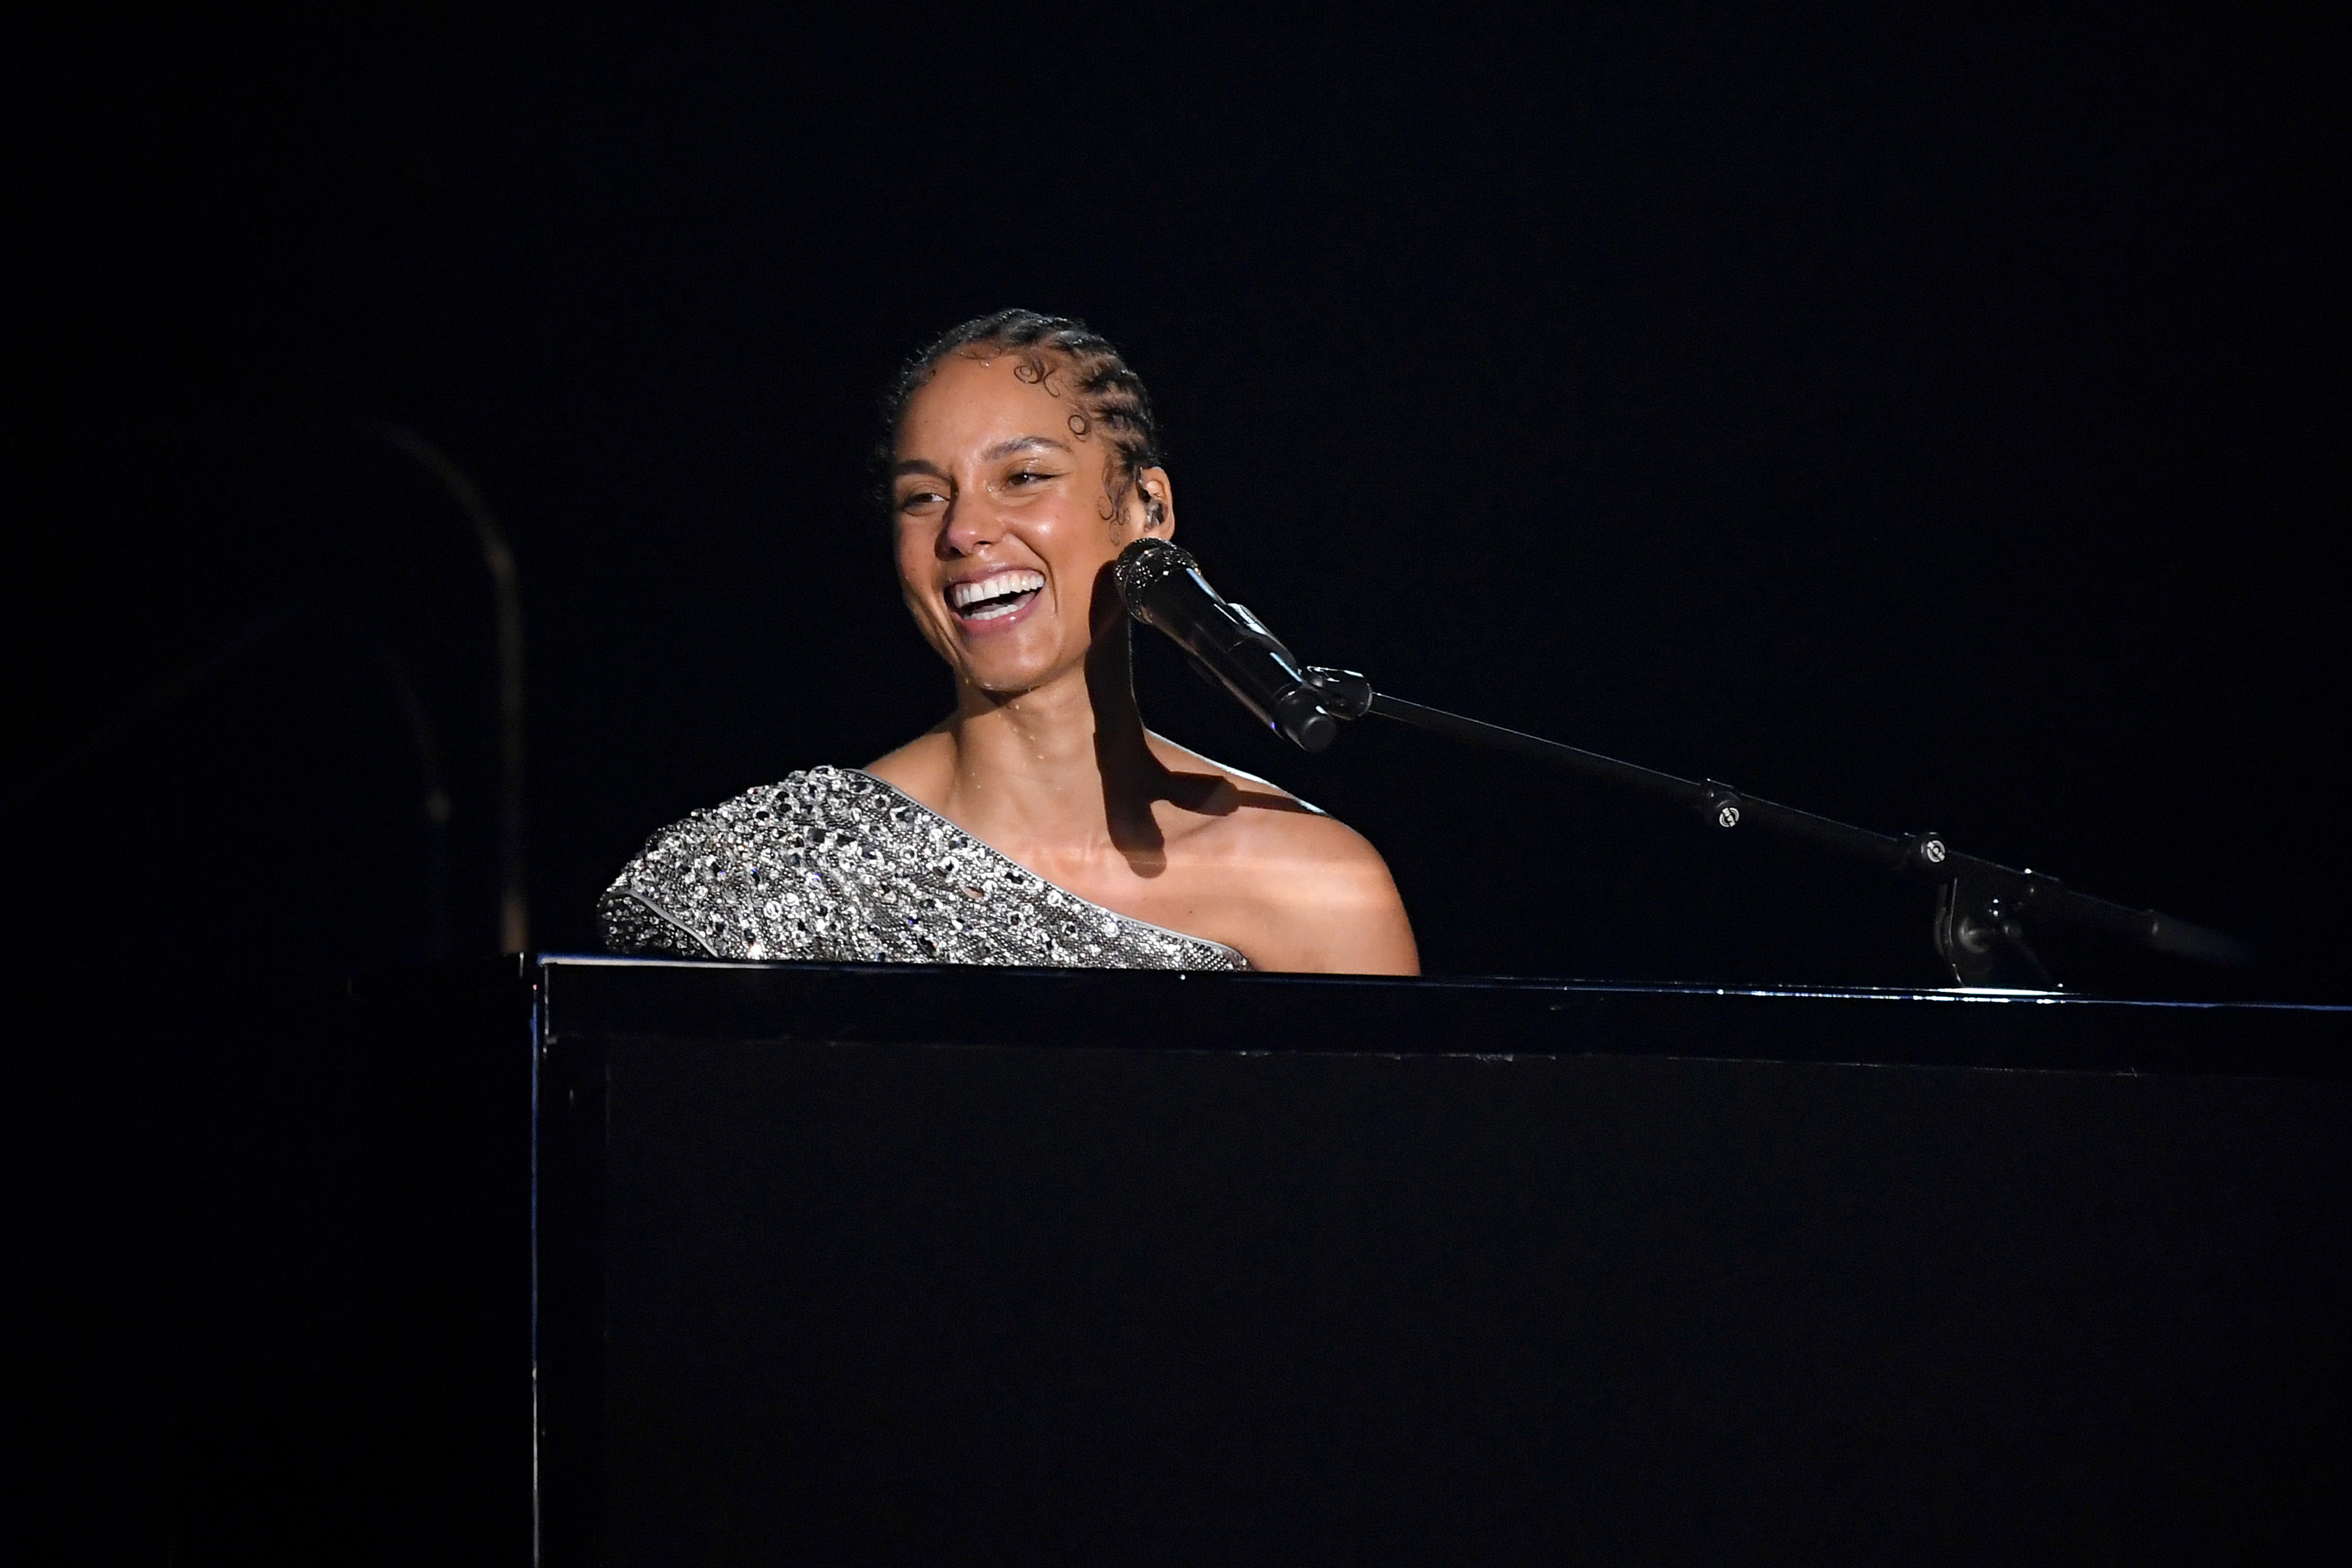 Alicia Keys performs onstage during the 62nd Annual GRAMMY Awards at Staples Center on January 26, 2020 in Los Angeles, California. (Getty Images—2020 Getty Images)